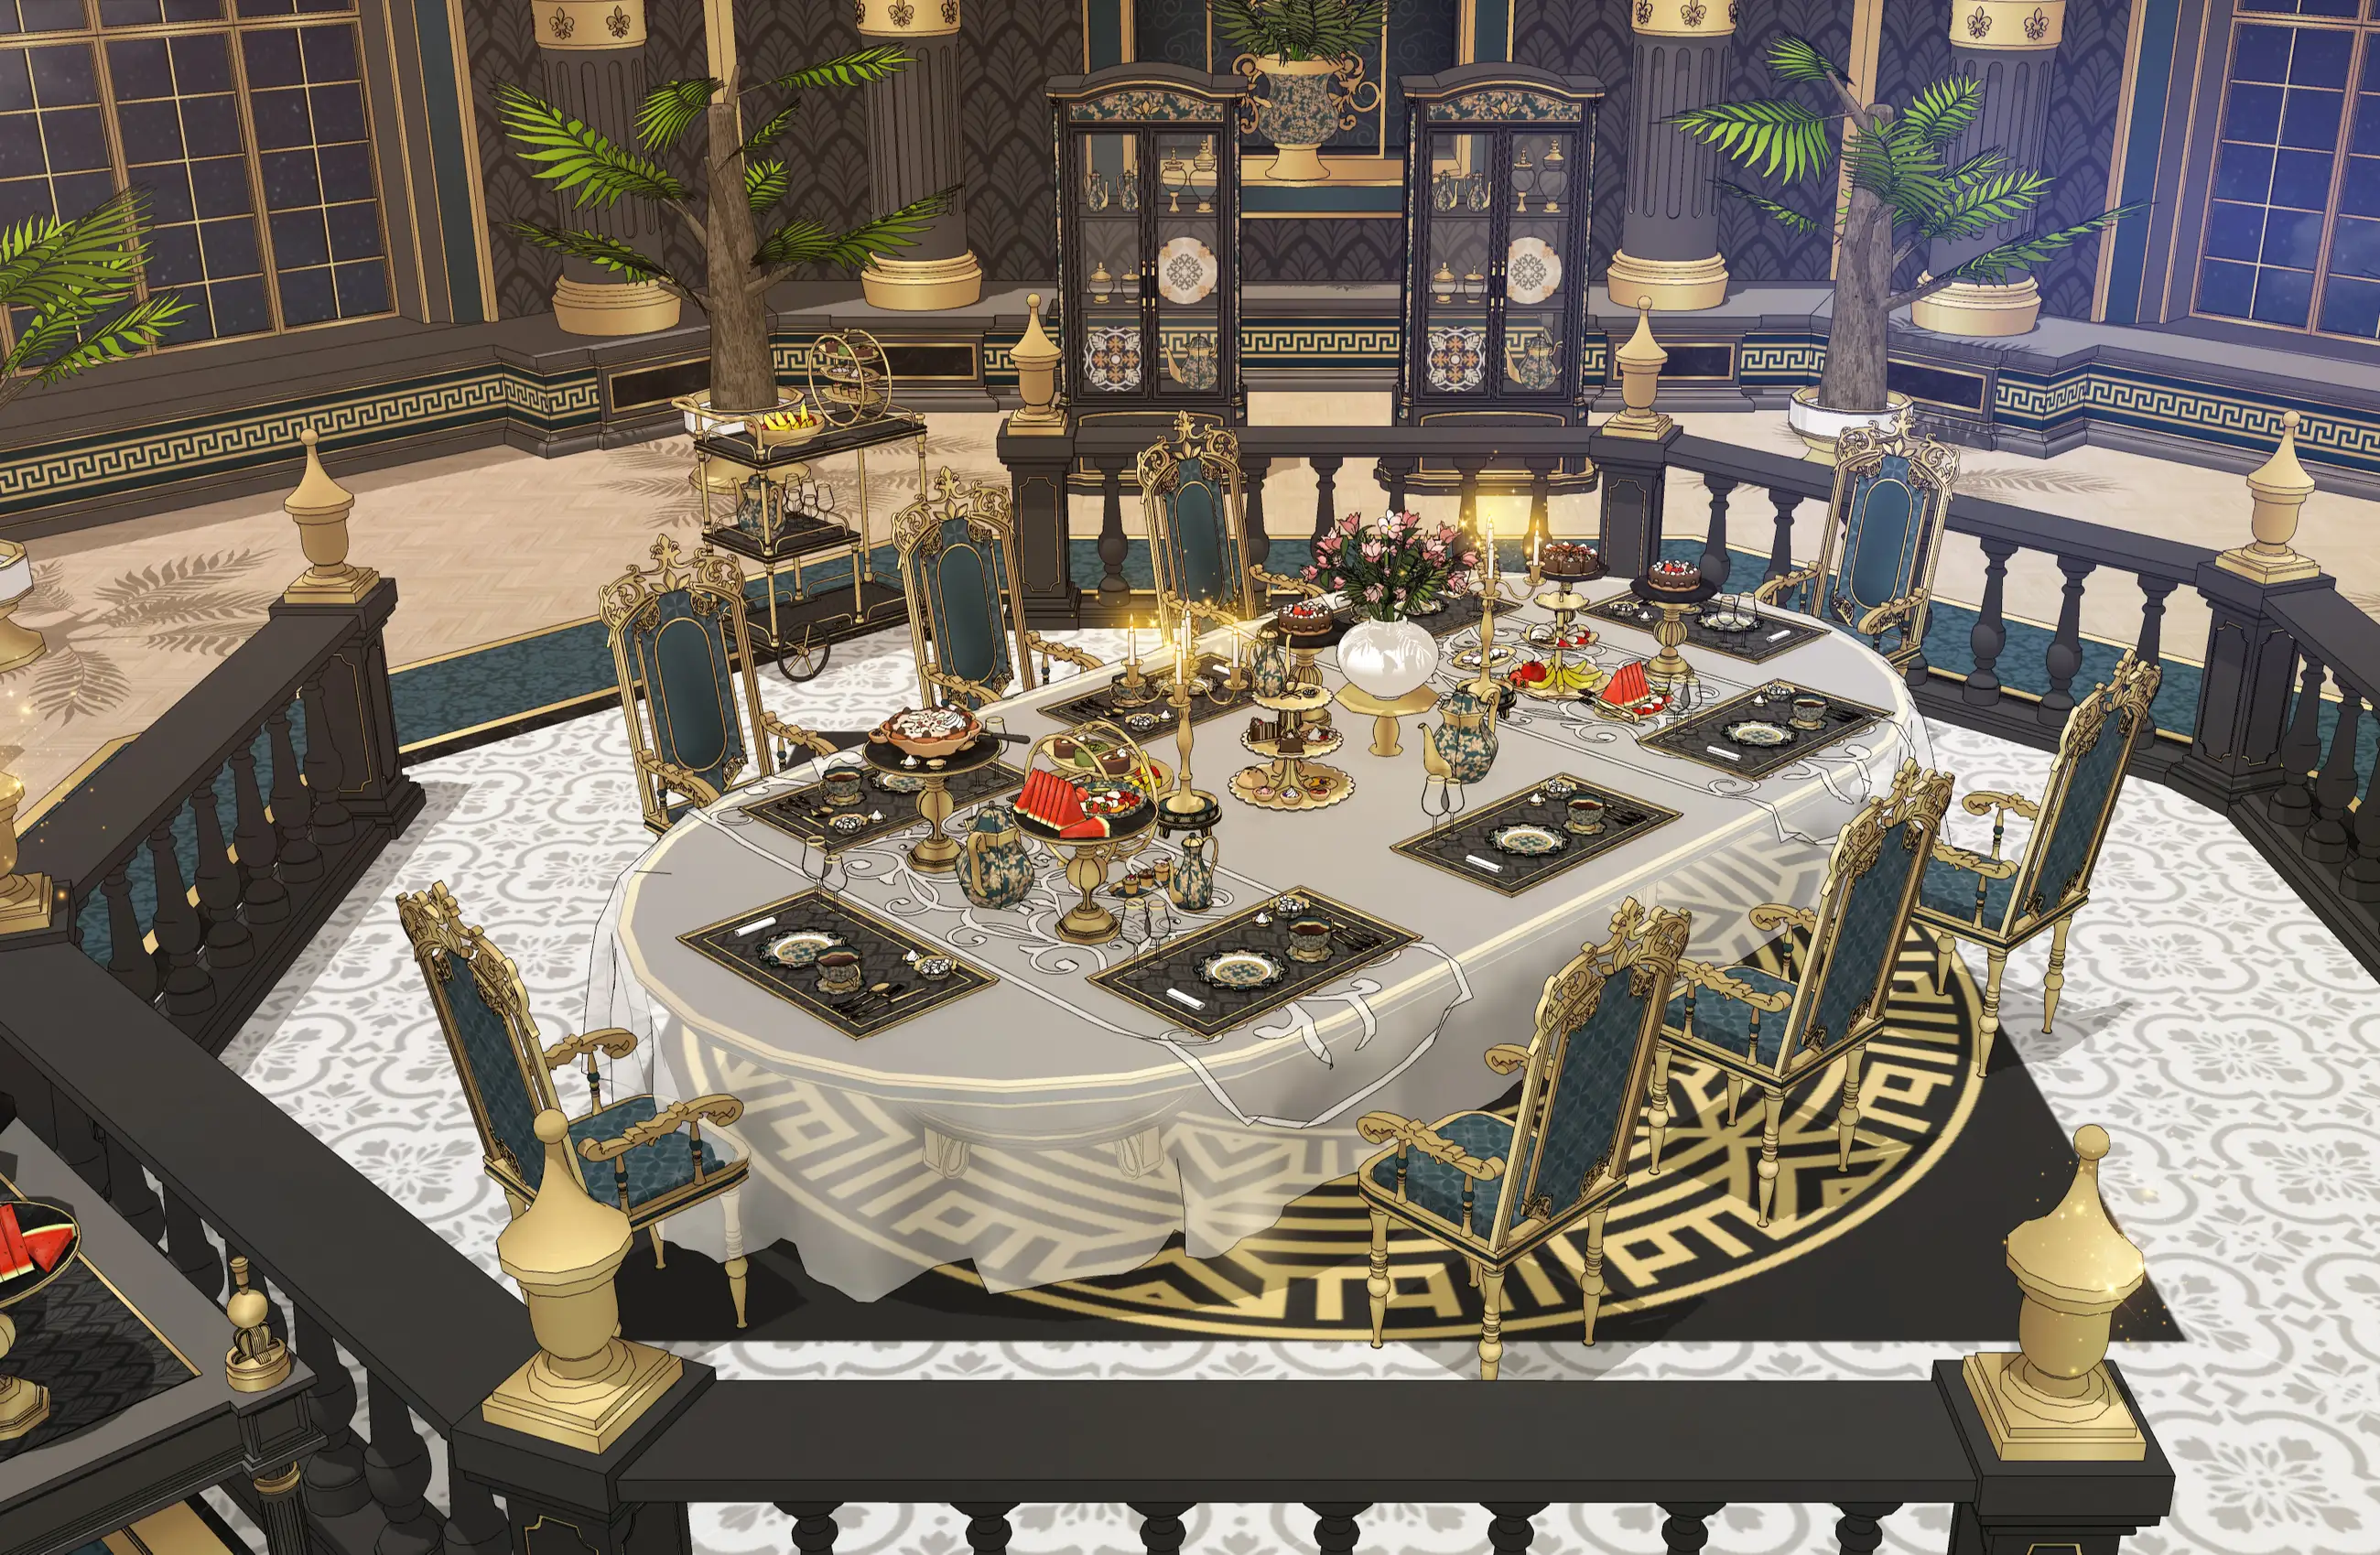 Black & Gold Lofan mansion that reminds me more and more - Tea Room